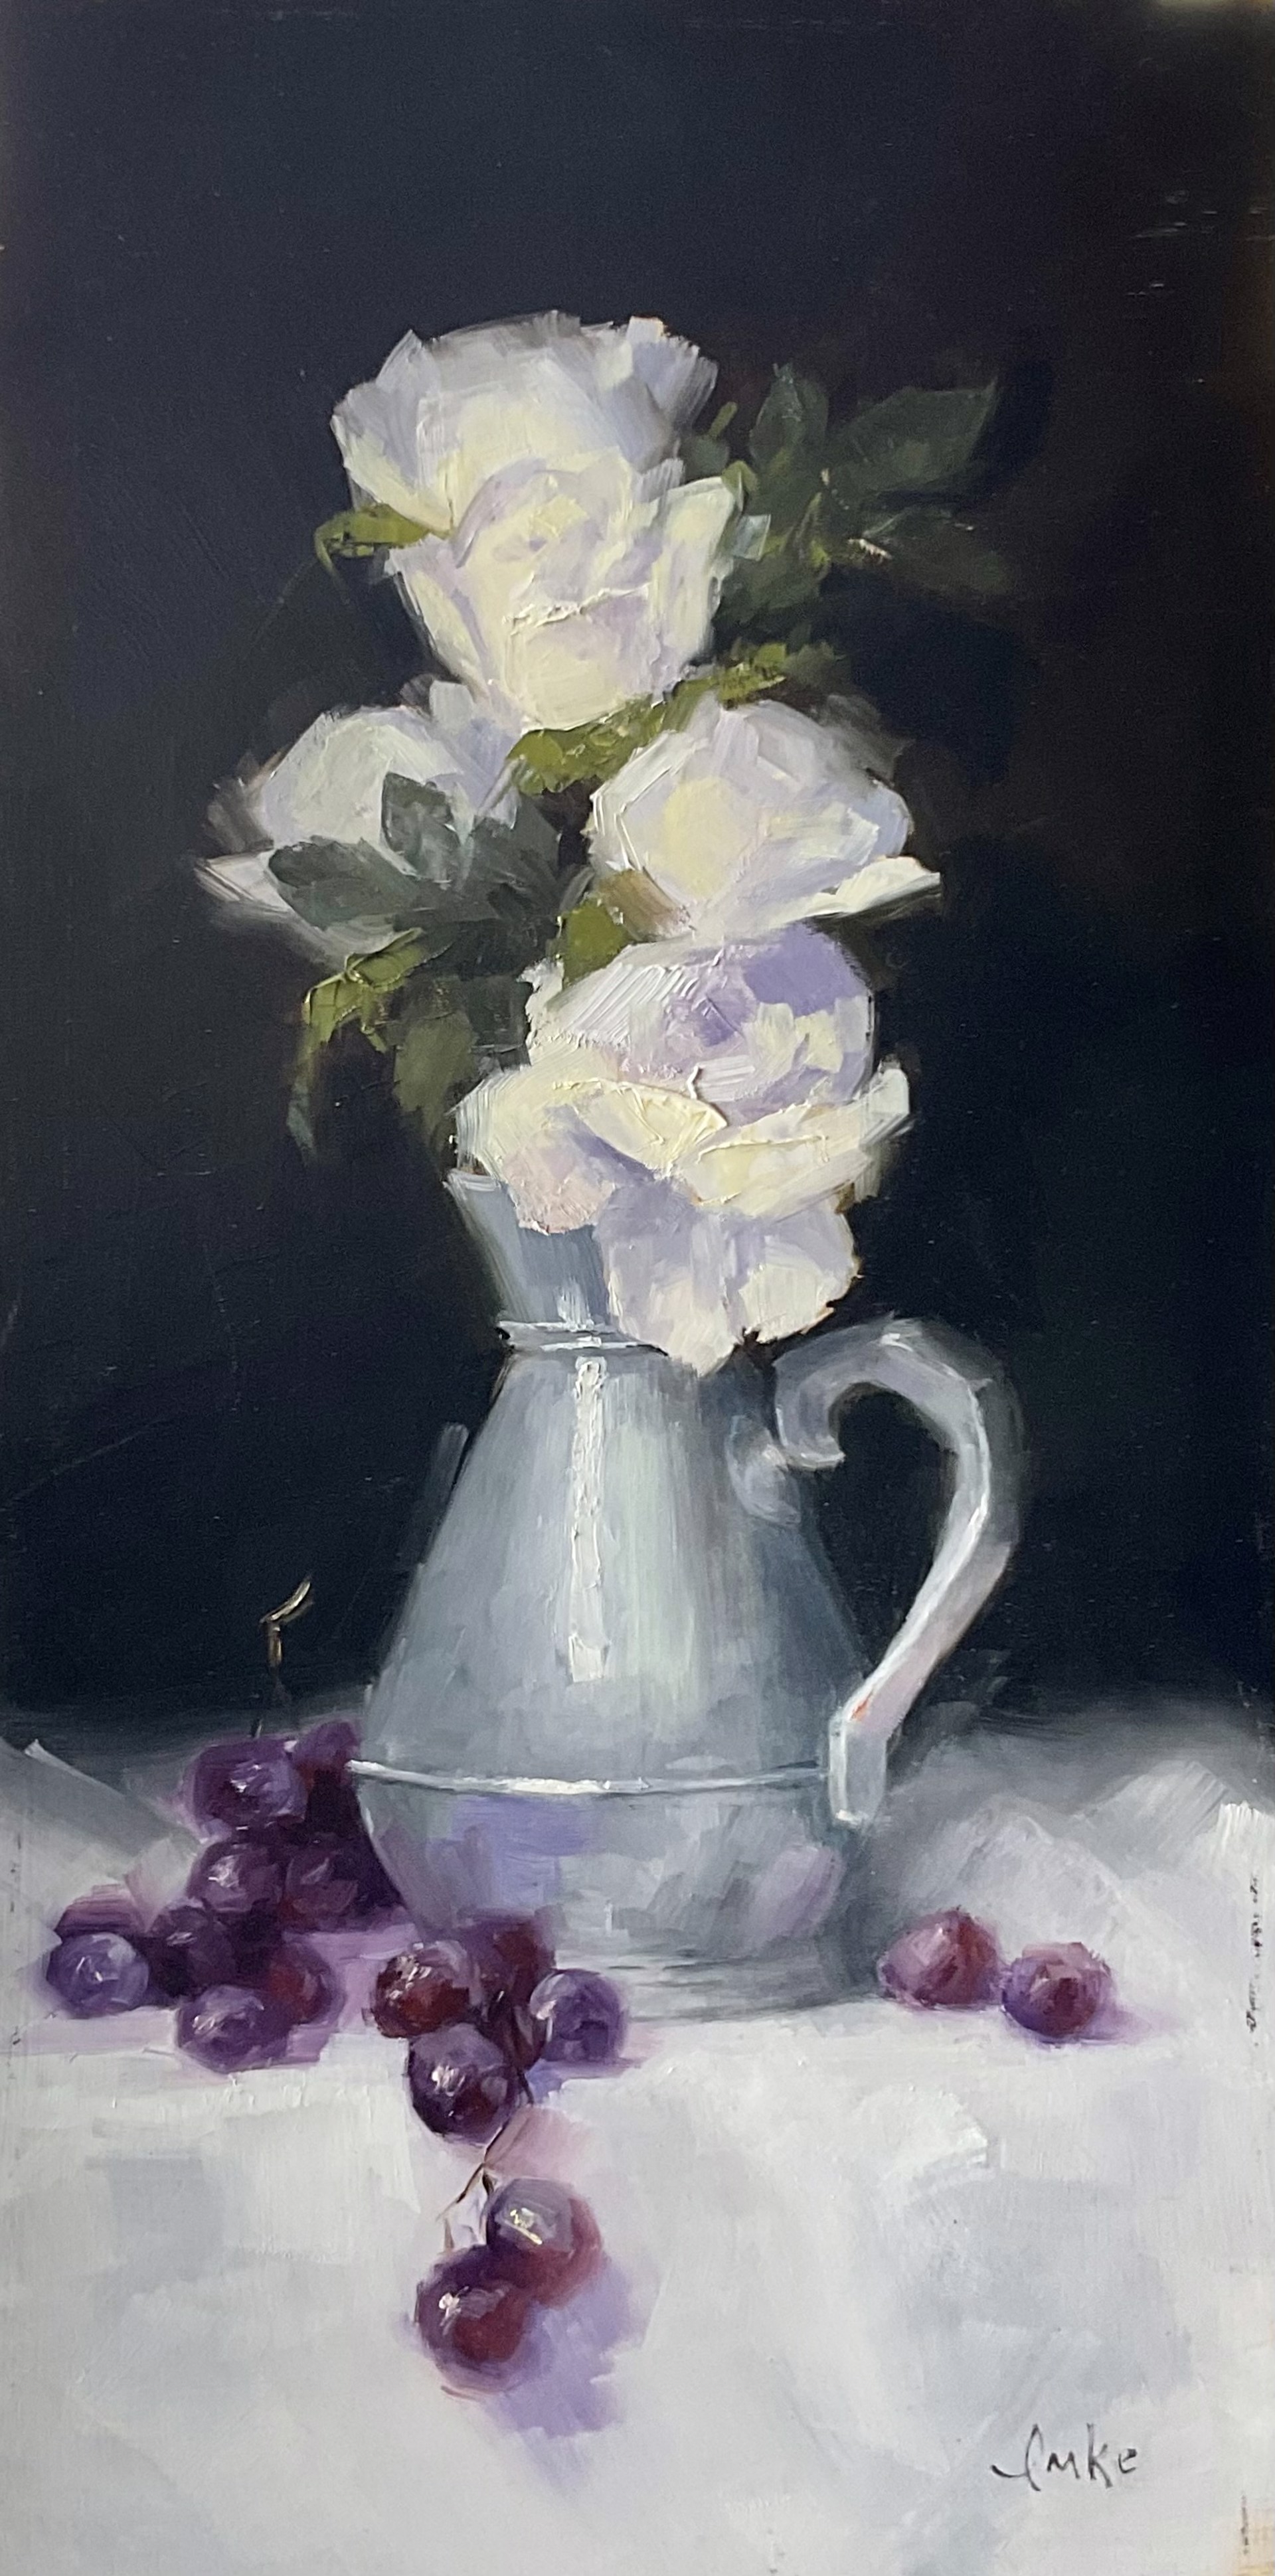 Pewter and Roses by Denise Imke